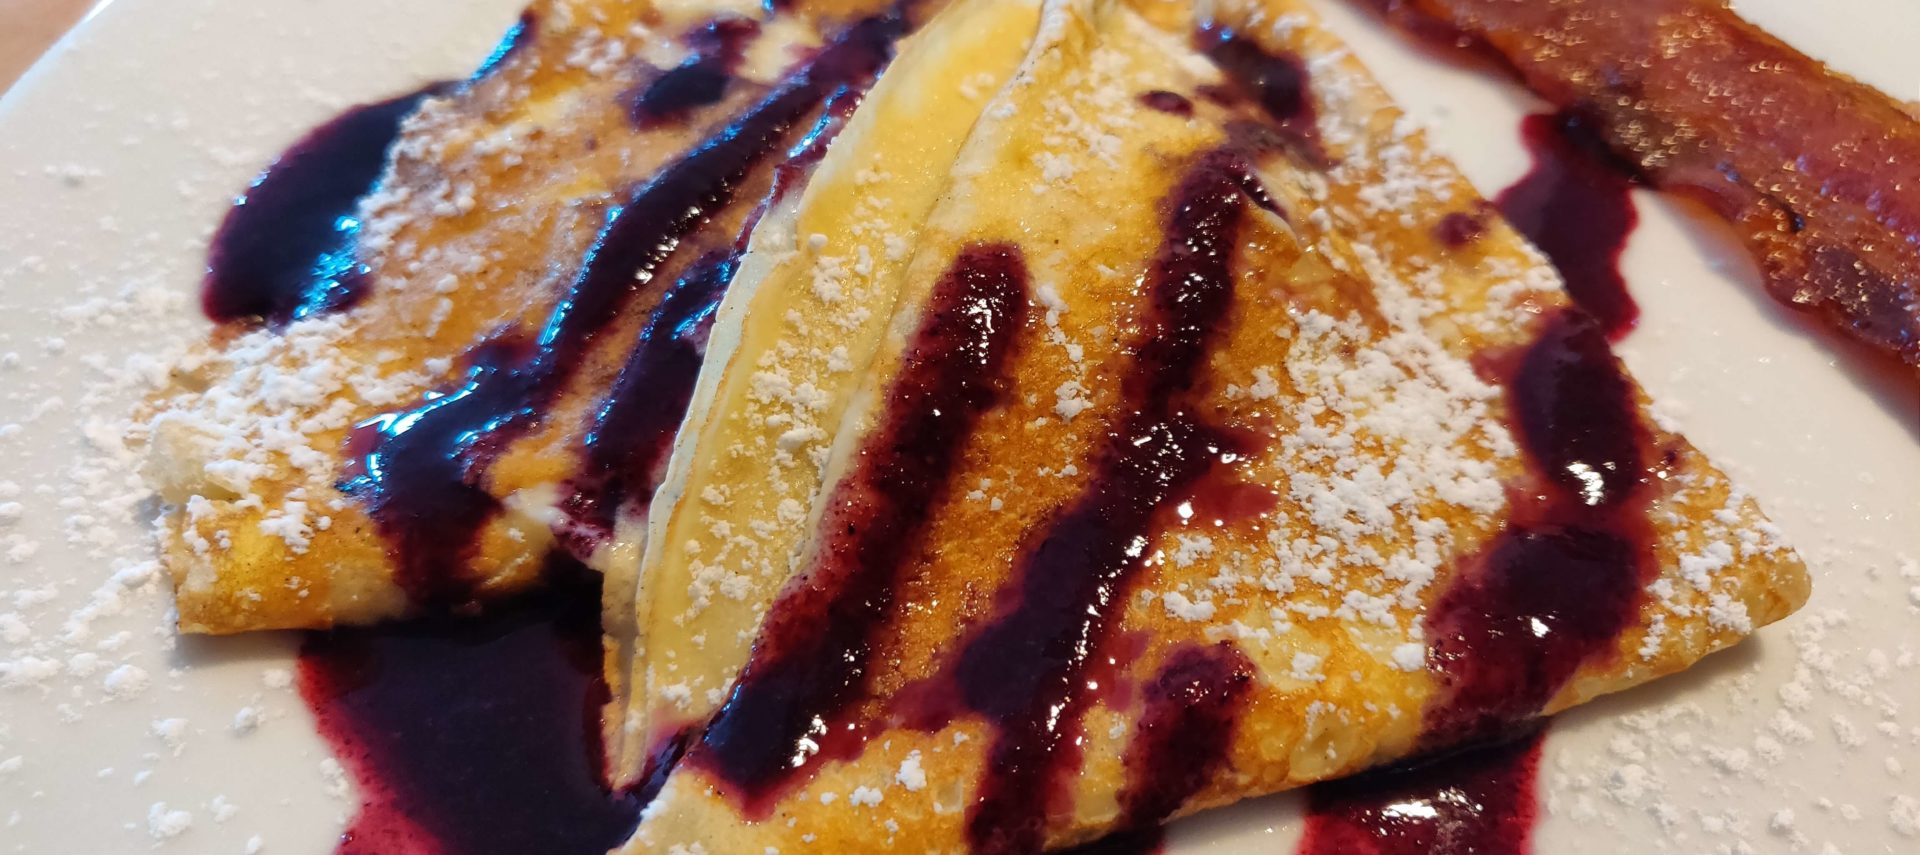 Crepes on a white plate with blueberry coulis and bacon